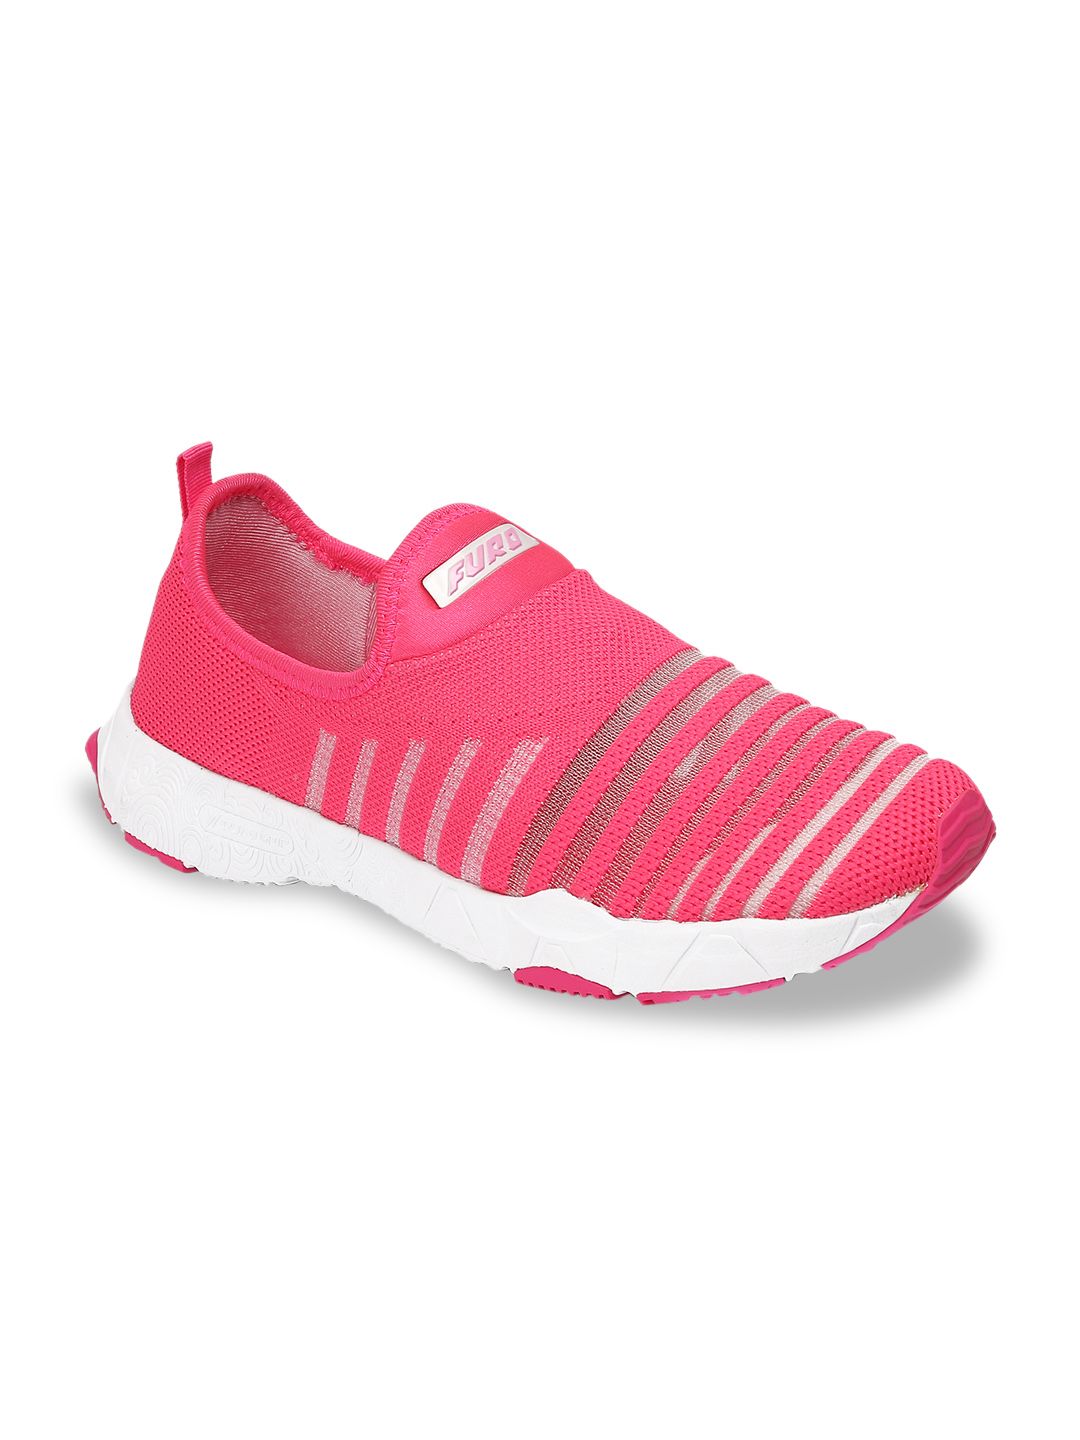 FURO by Red Chief Women Pink Mesh Walking Shoes Price in India